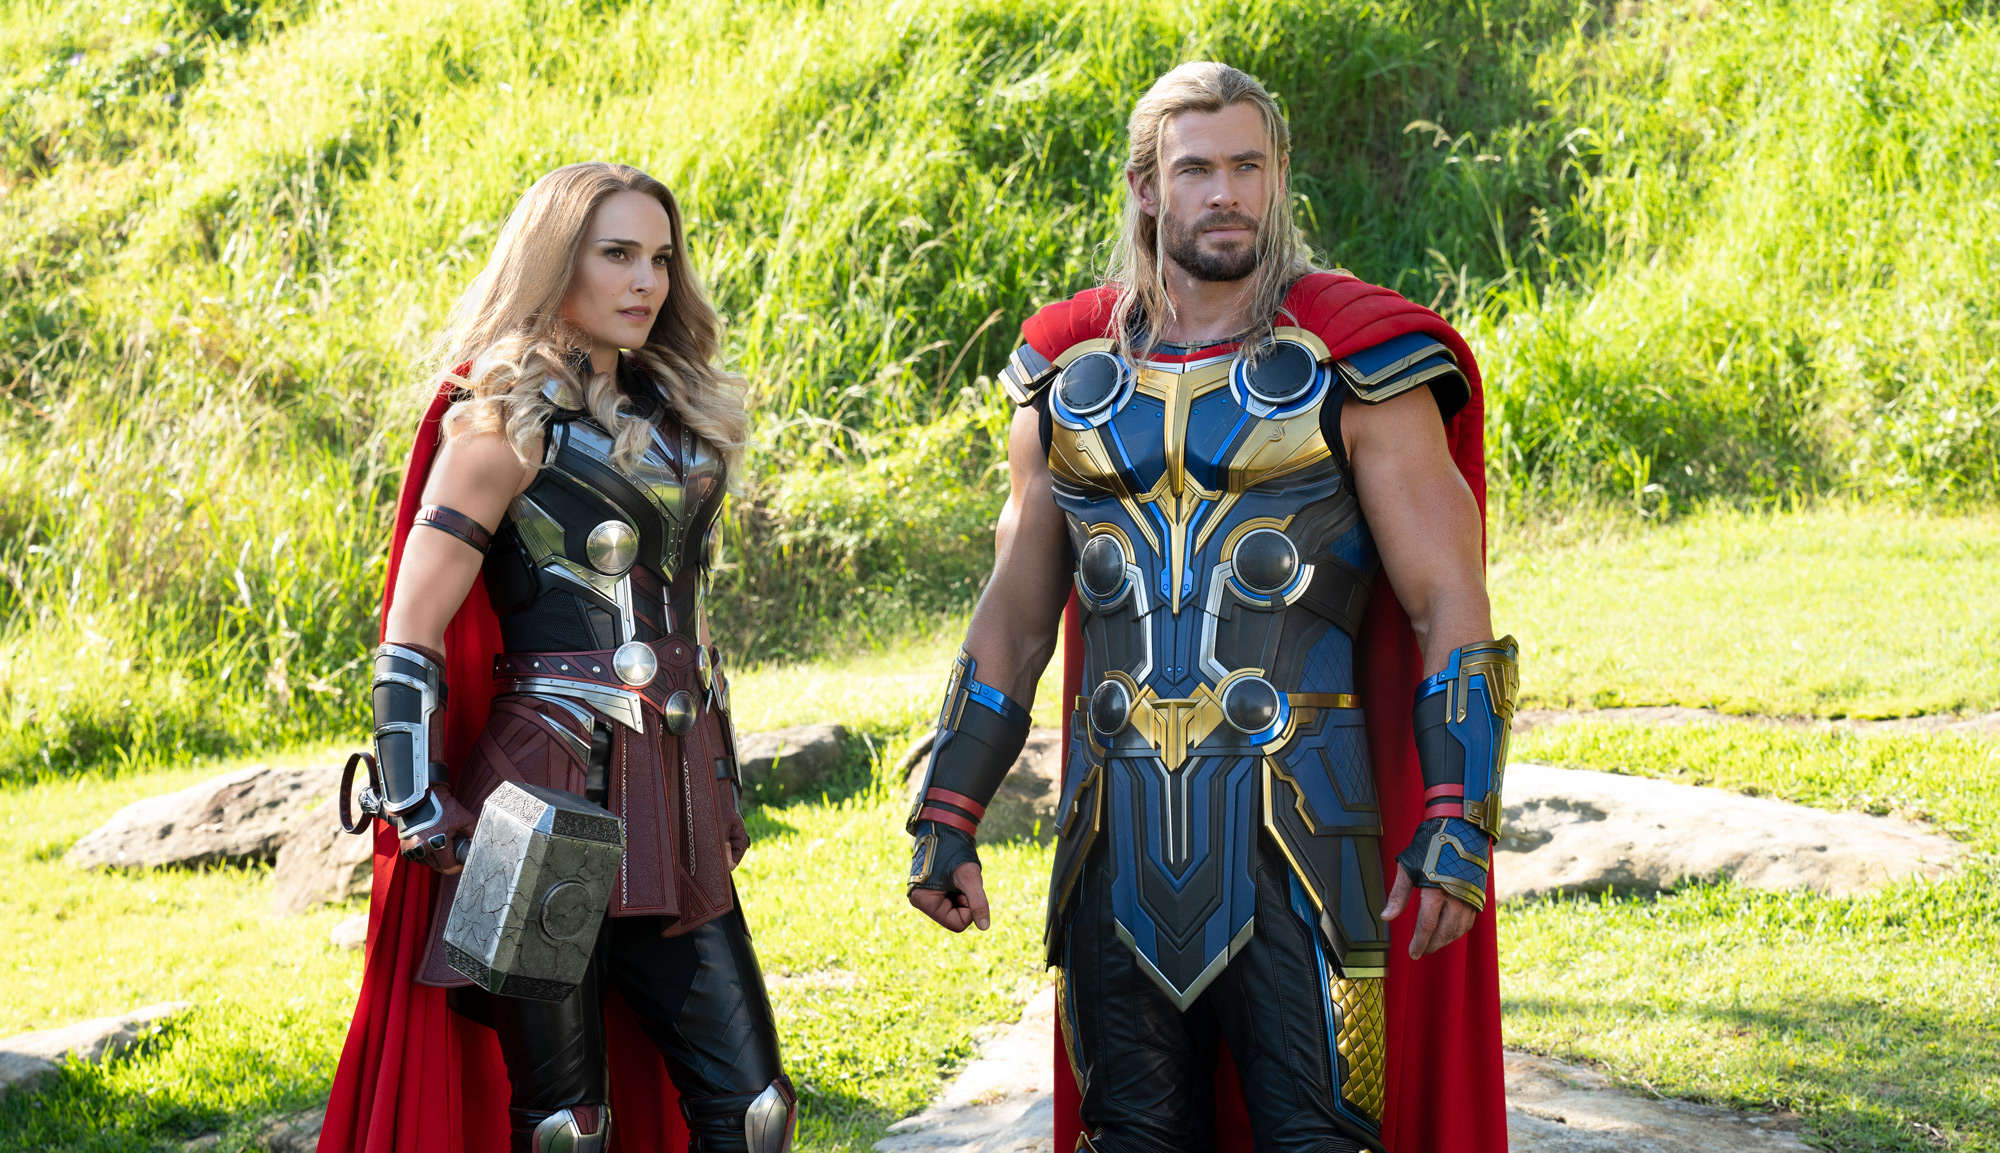 Chris Hemsworth and Natalie Portman in "Thor: Love and Thunder"